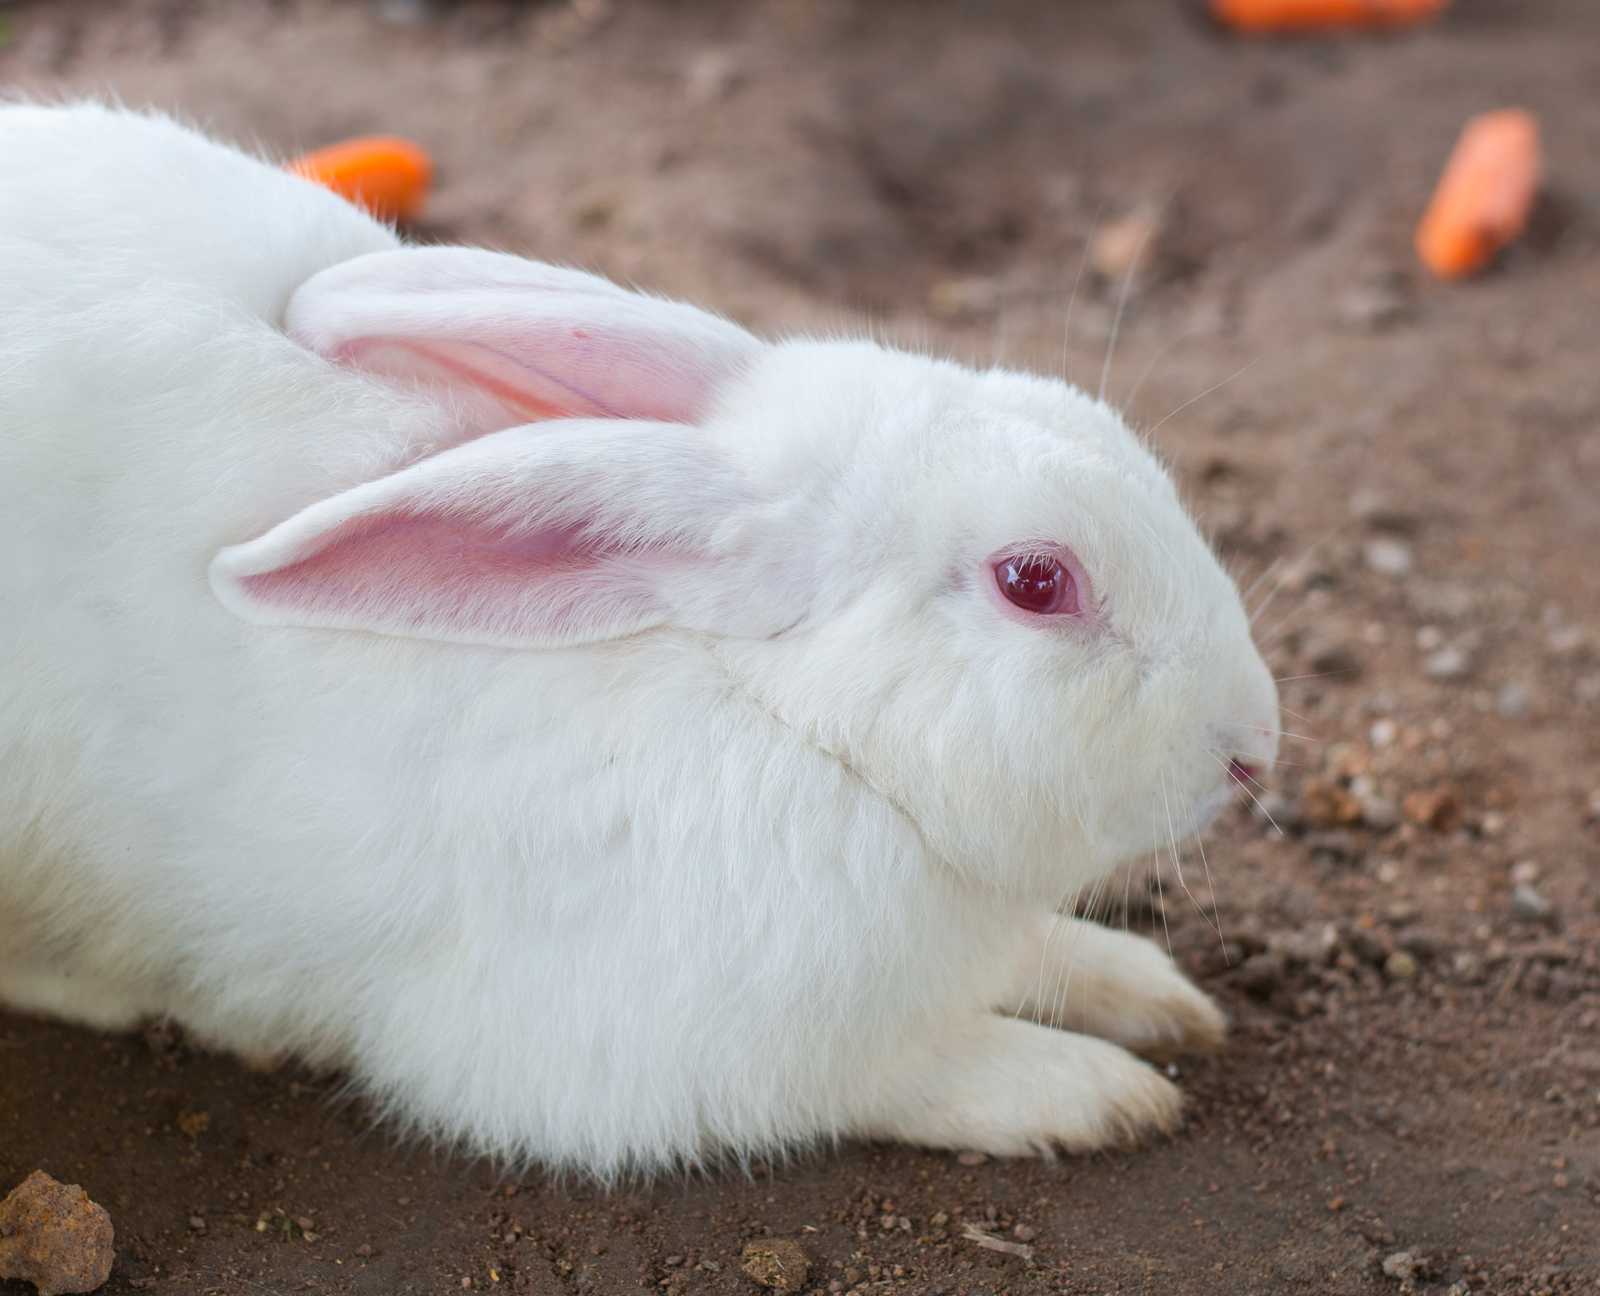 Why do rabbits have red eyes?